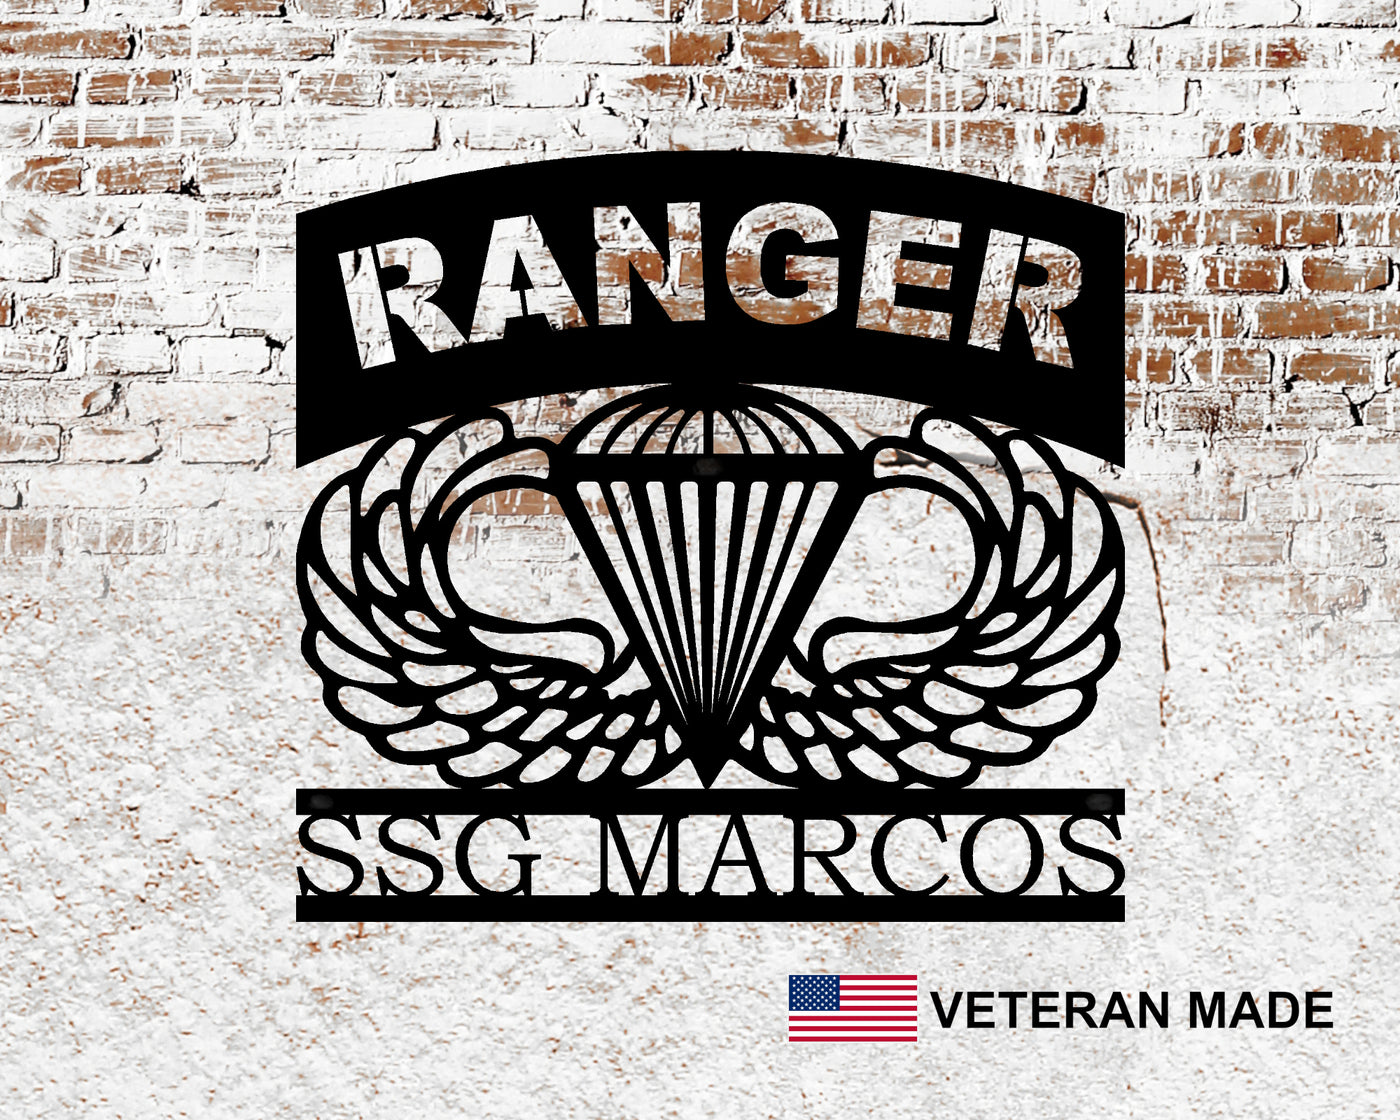 Personalized Airborne Ranger Metal Sign with Rank and Name - Madison Iron and Wood - Personalized sign - metal outdoor decor - Steel deocrations - american made products - veteran owned business products - fencing decorations - fencing supplies - custom wall decorations - personalized wall signs - steel - decorative post caps - steel post caps - metal post caps - brackets - structural brackets - home improvement - easter - easter decorations - easter gift - easter yard decor